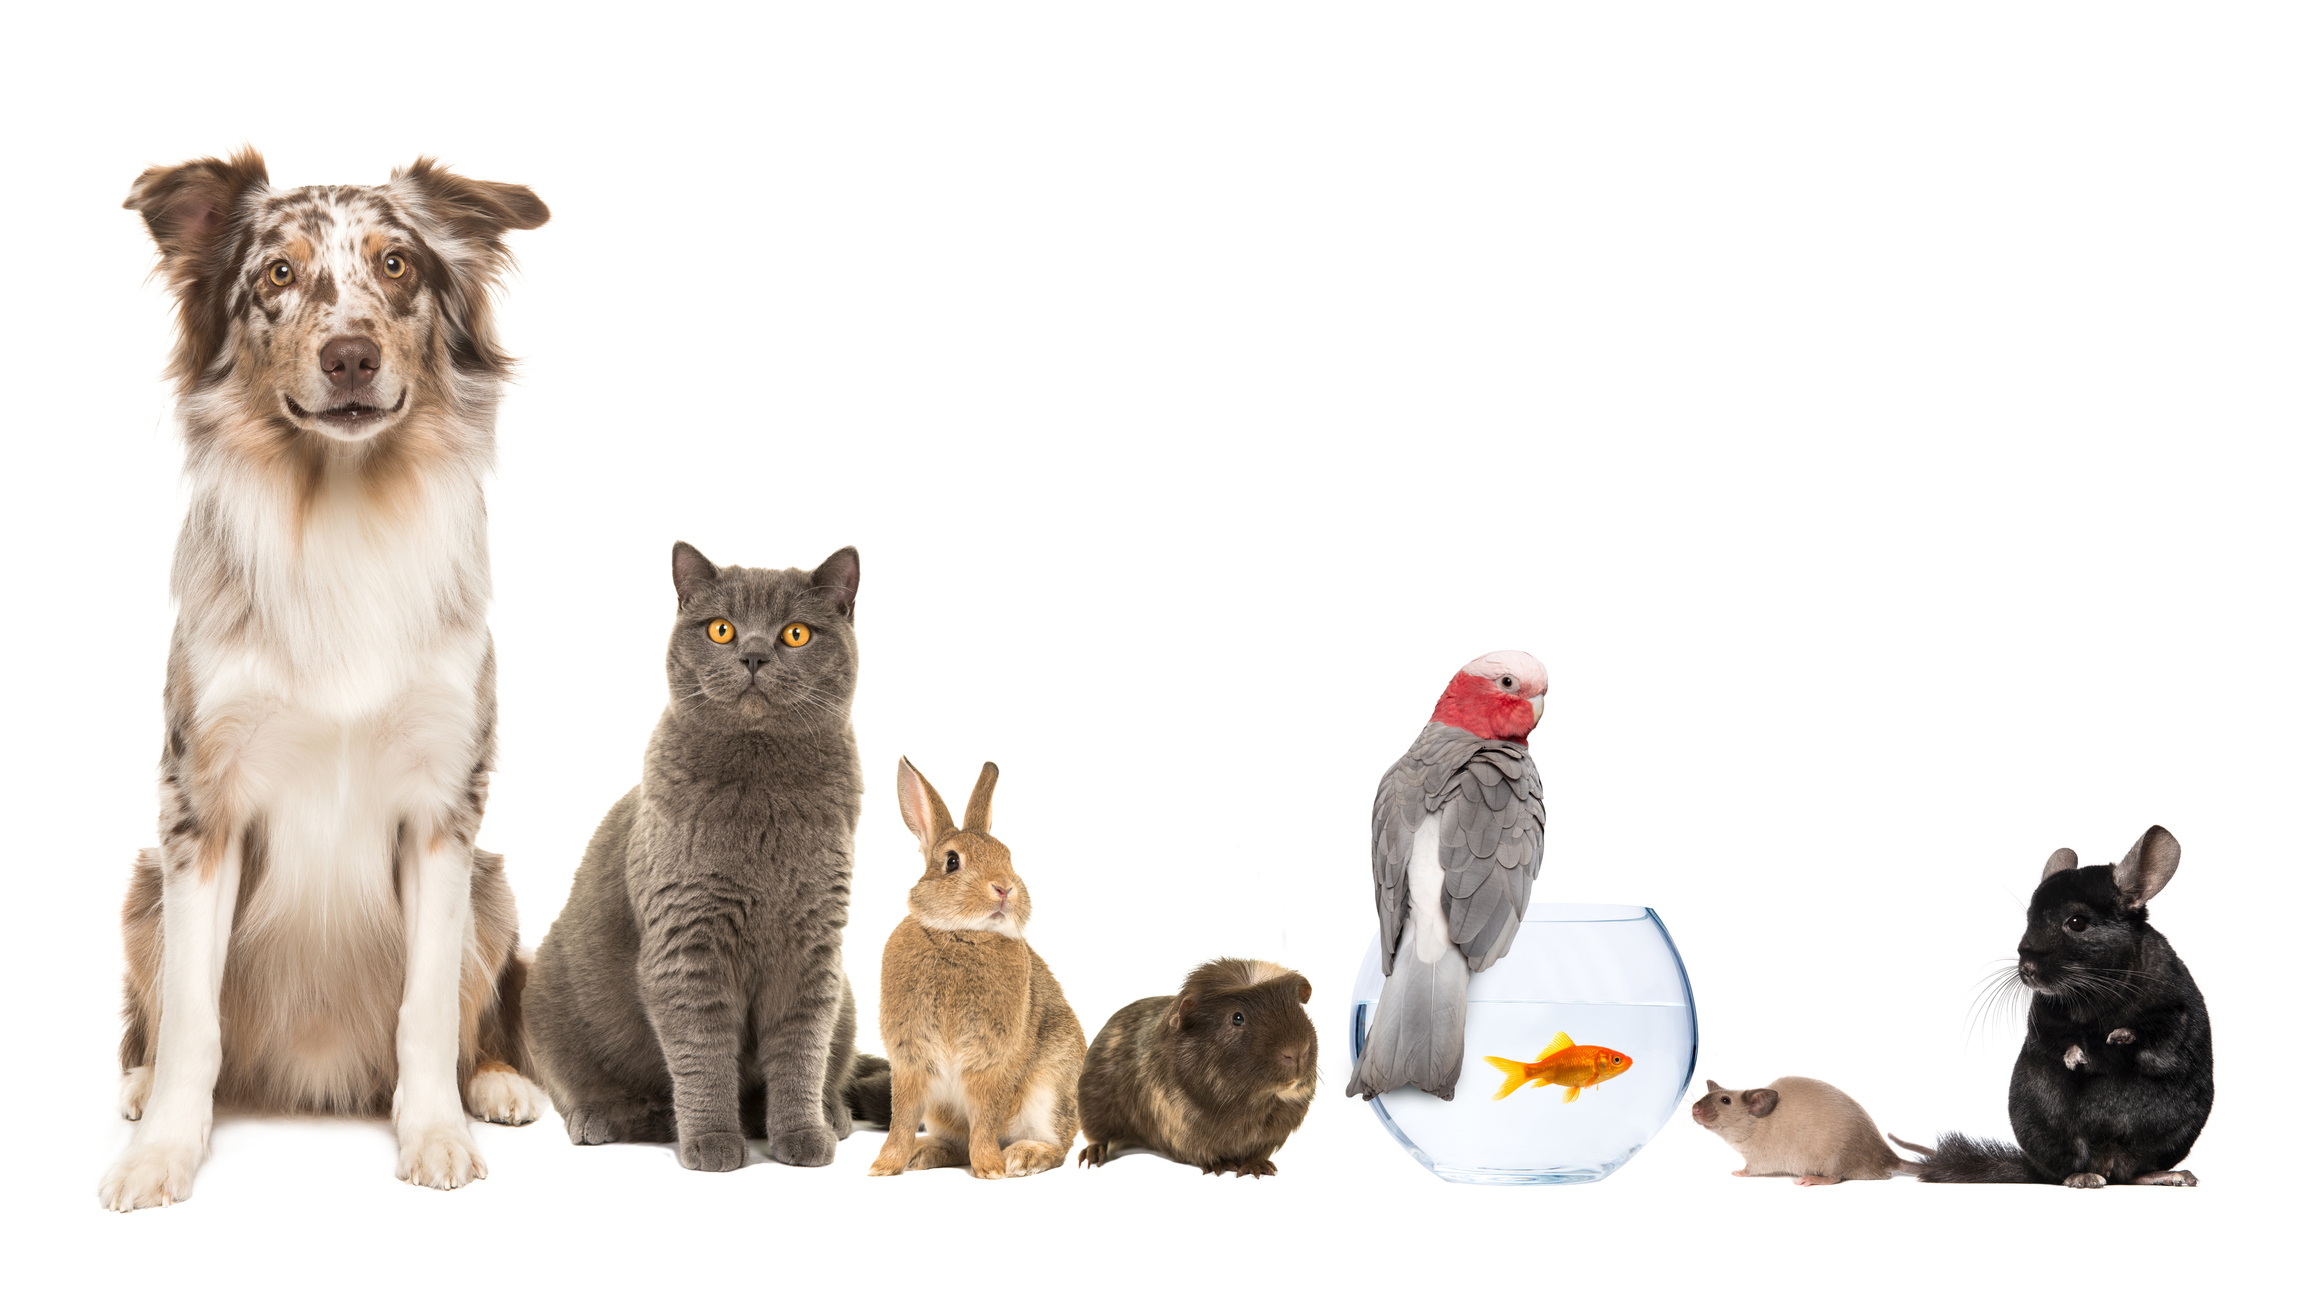 Group Of Different Kind Of Pets, Like Cat, Dog, Rabbit, Mouse, Chinchilla, Guinea Pig, Bird And Fish On A White Background With Space For Copy